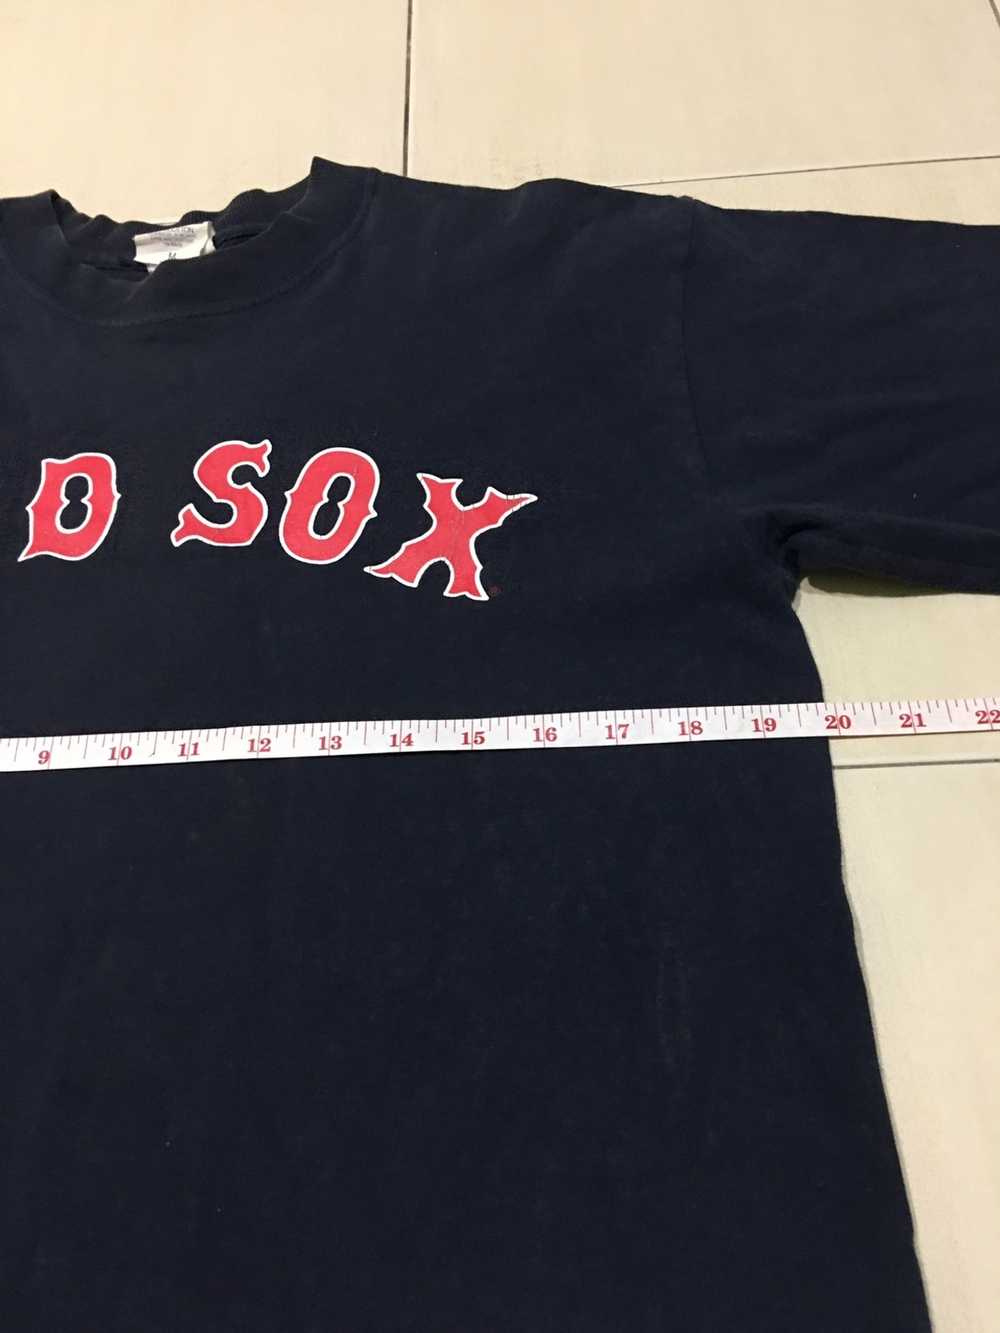 Red Sox 90's Vintage Baseball Jersey by Majestic Made in USA – American  Vintage Clothing Co.